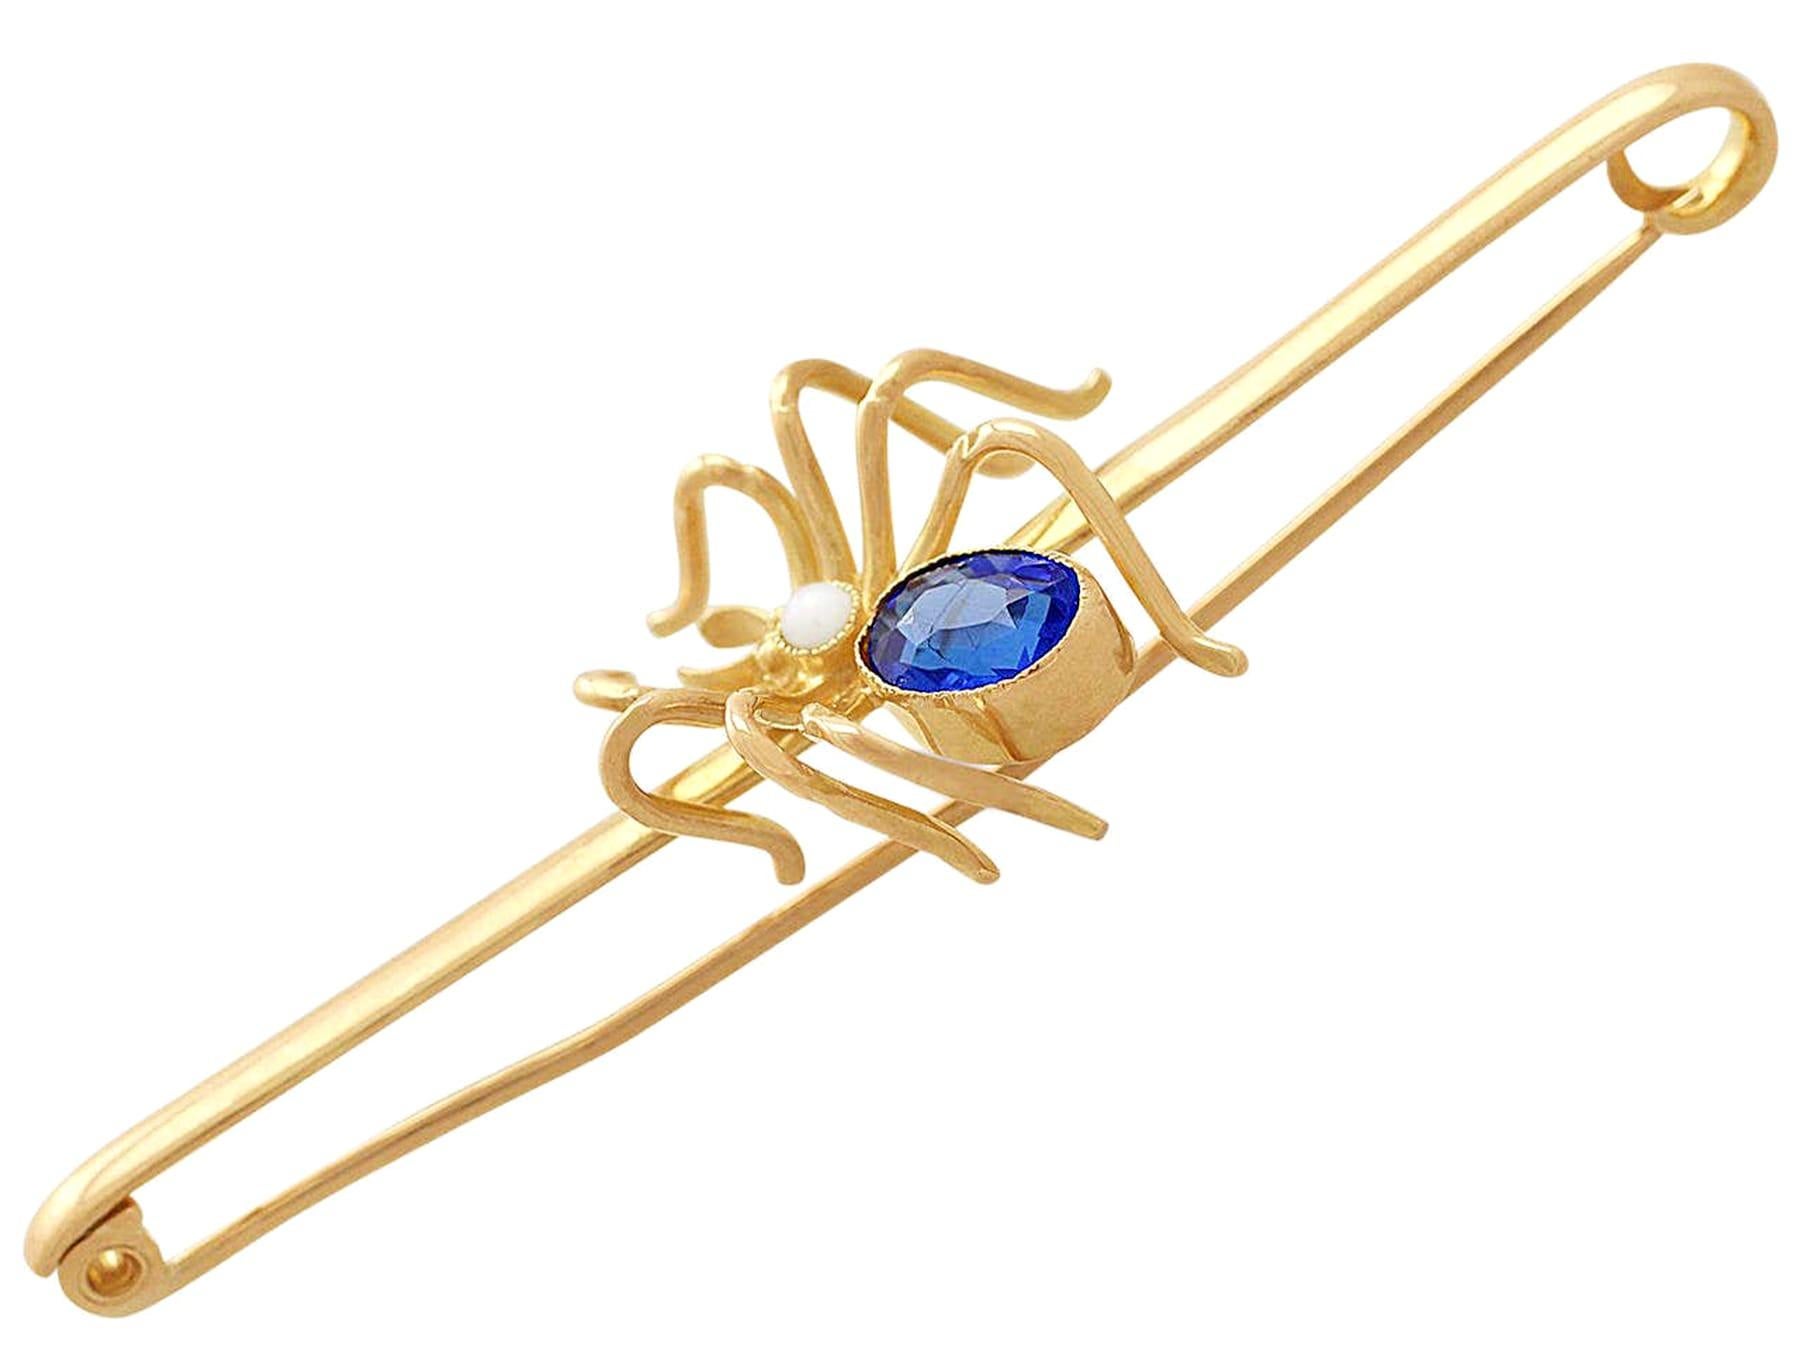 Antique 1890s Pearl and Blue Colored Glass Yellow Gold Spider Brooch In Excellent Condition For Sale In Jesmond, Newcastle Upon Tyne